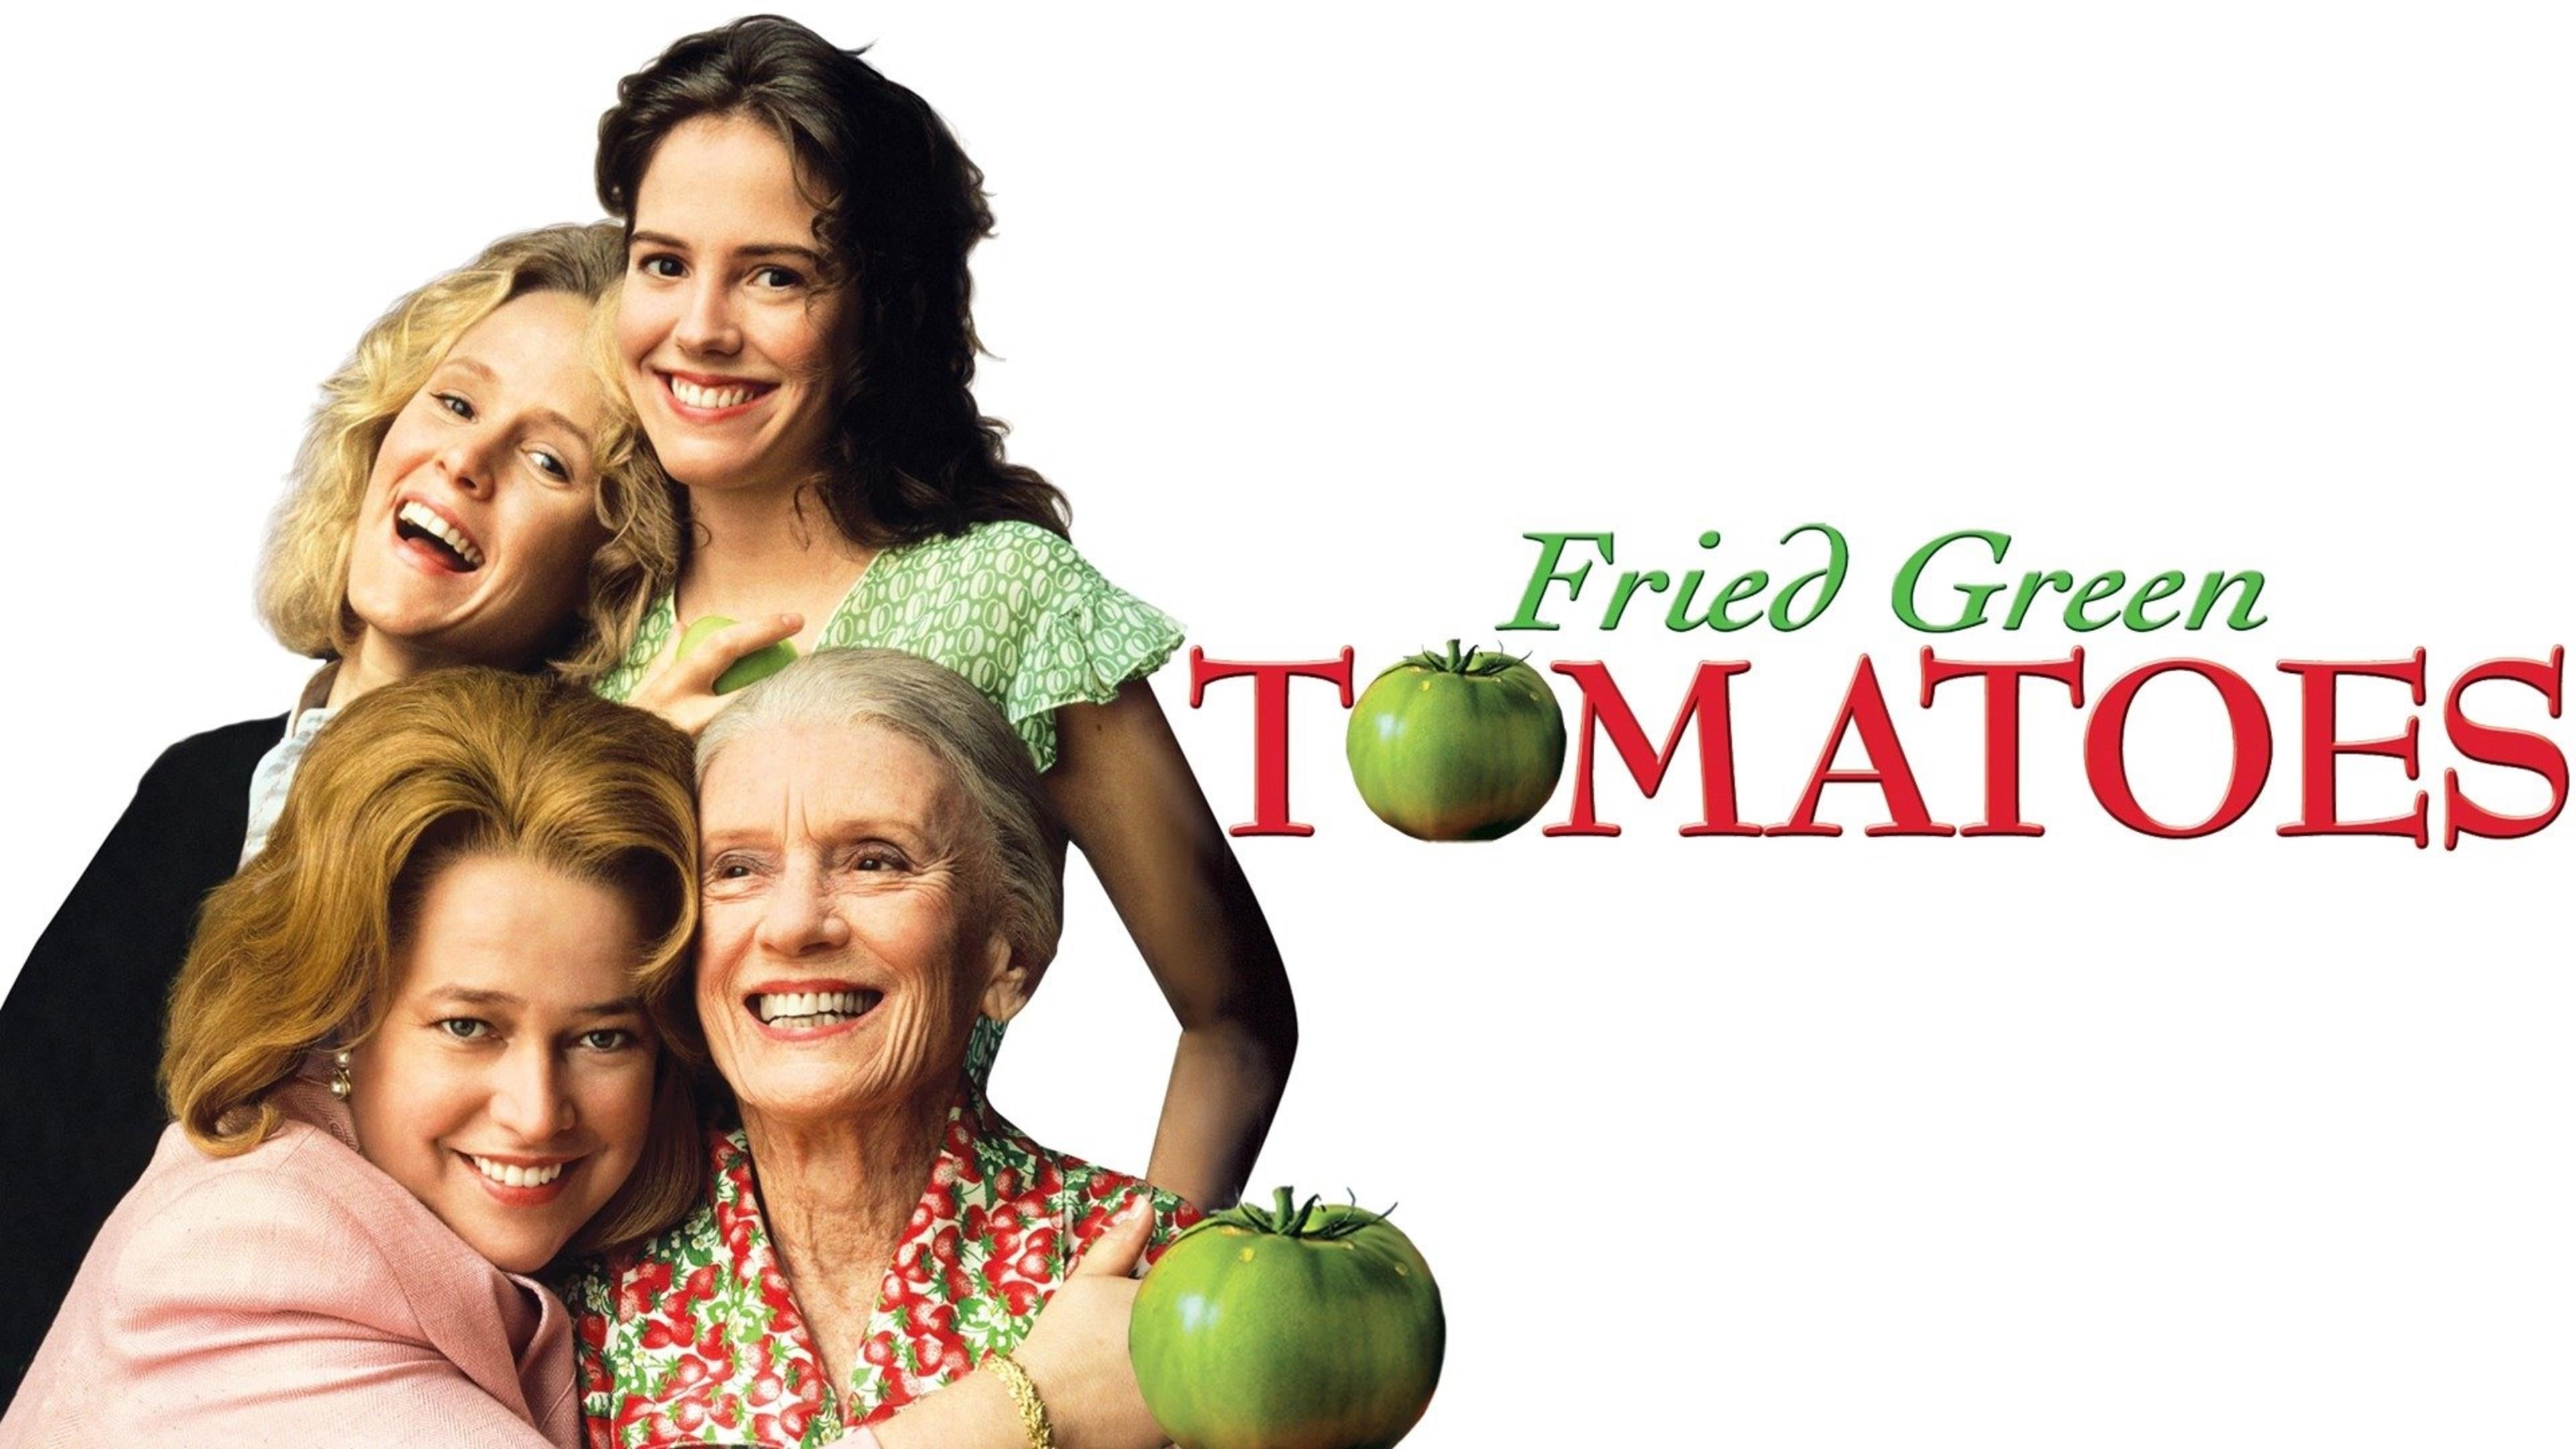 Fried Green Tomatoes Photos.